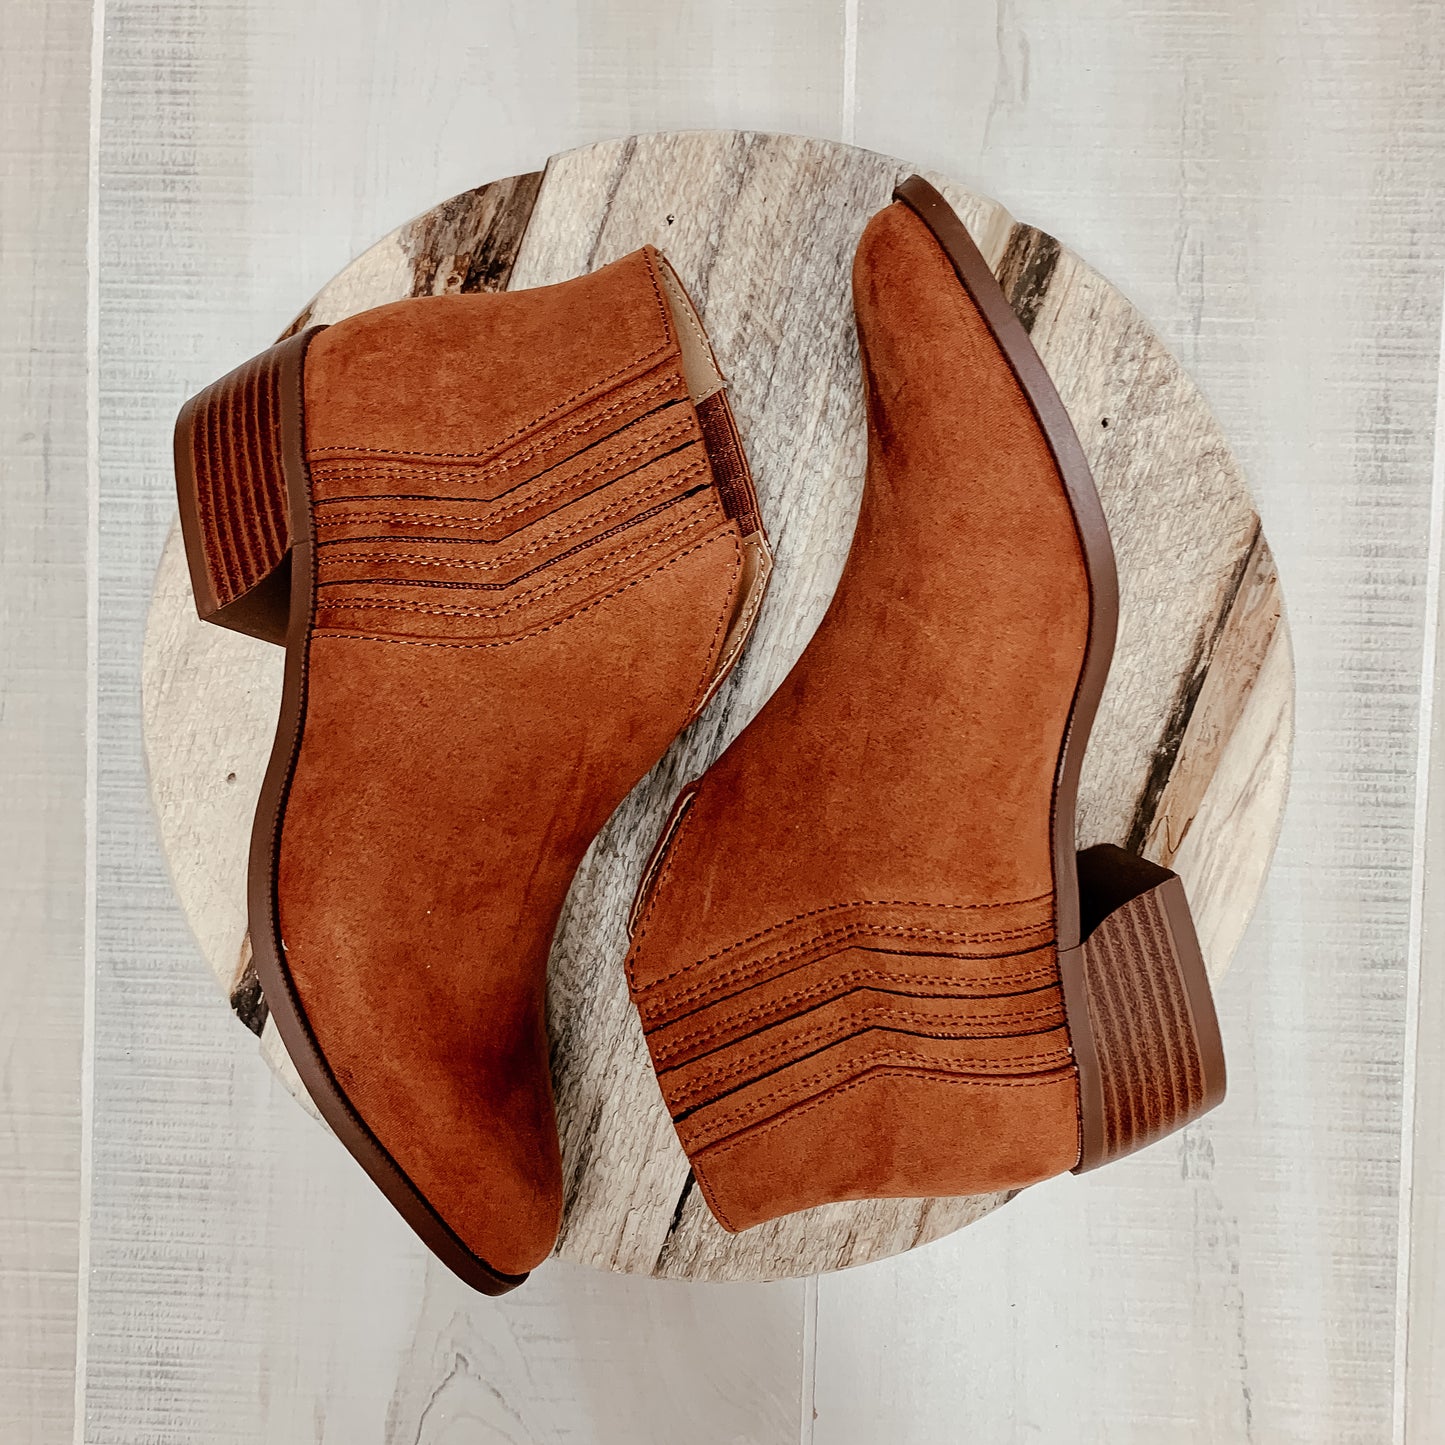 Monumental Moves Booties